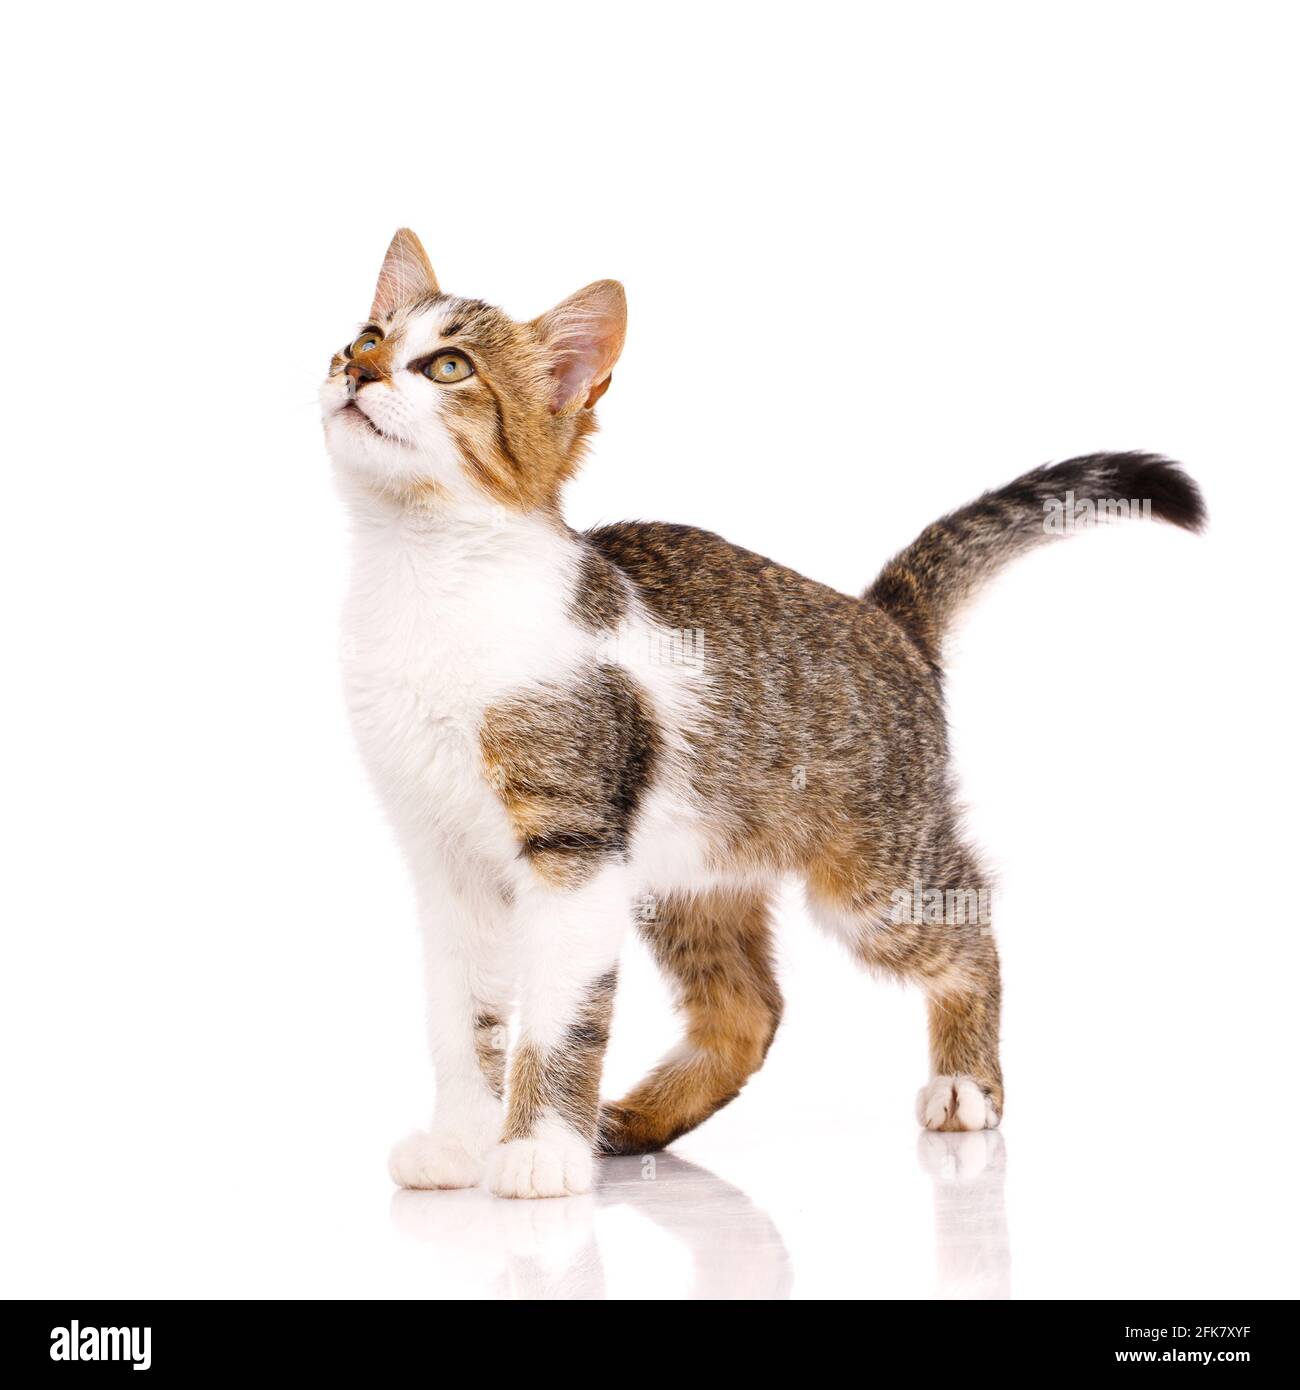 Friendly pet. Small cat with white and brown fur looks up intently on a white background. Stock Photo